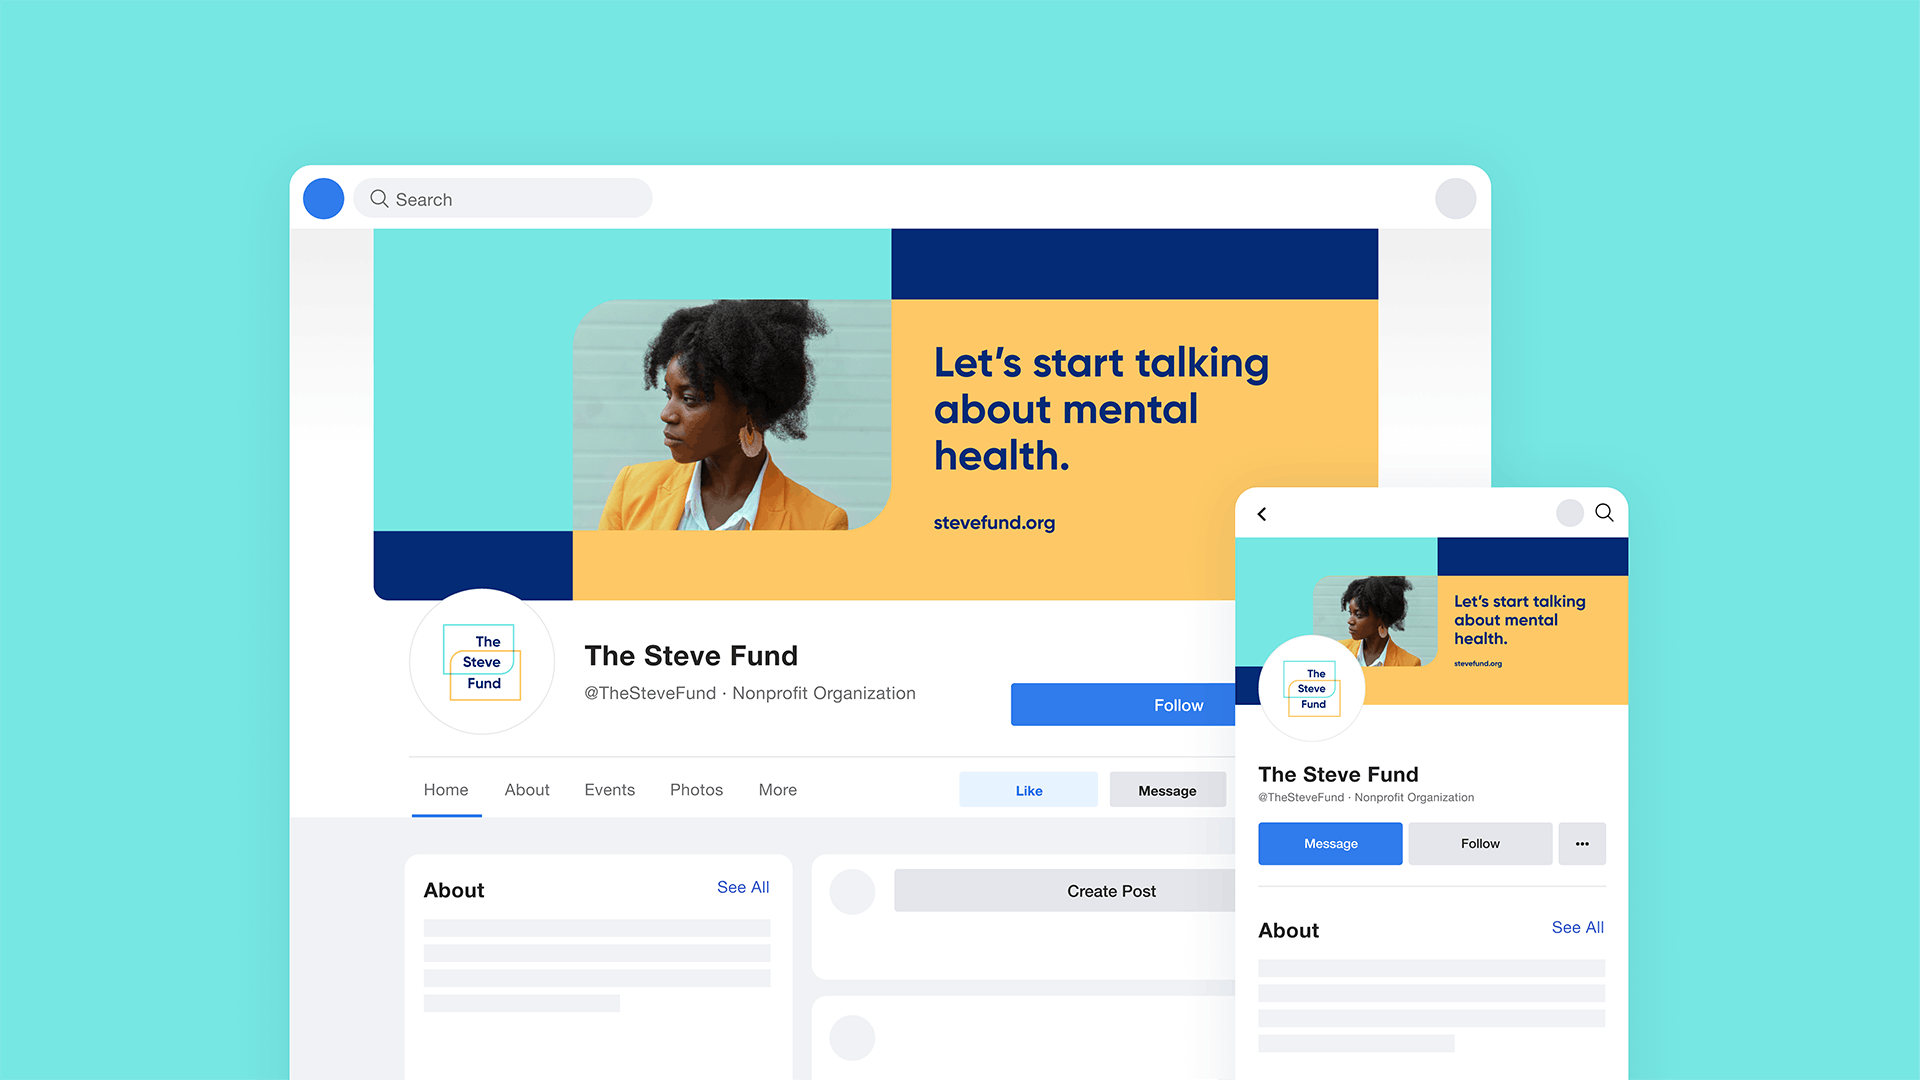 The Steve Fund website desktop and mobile experiences